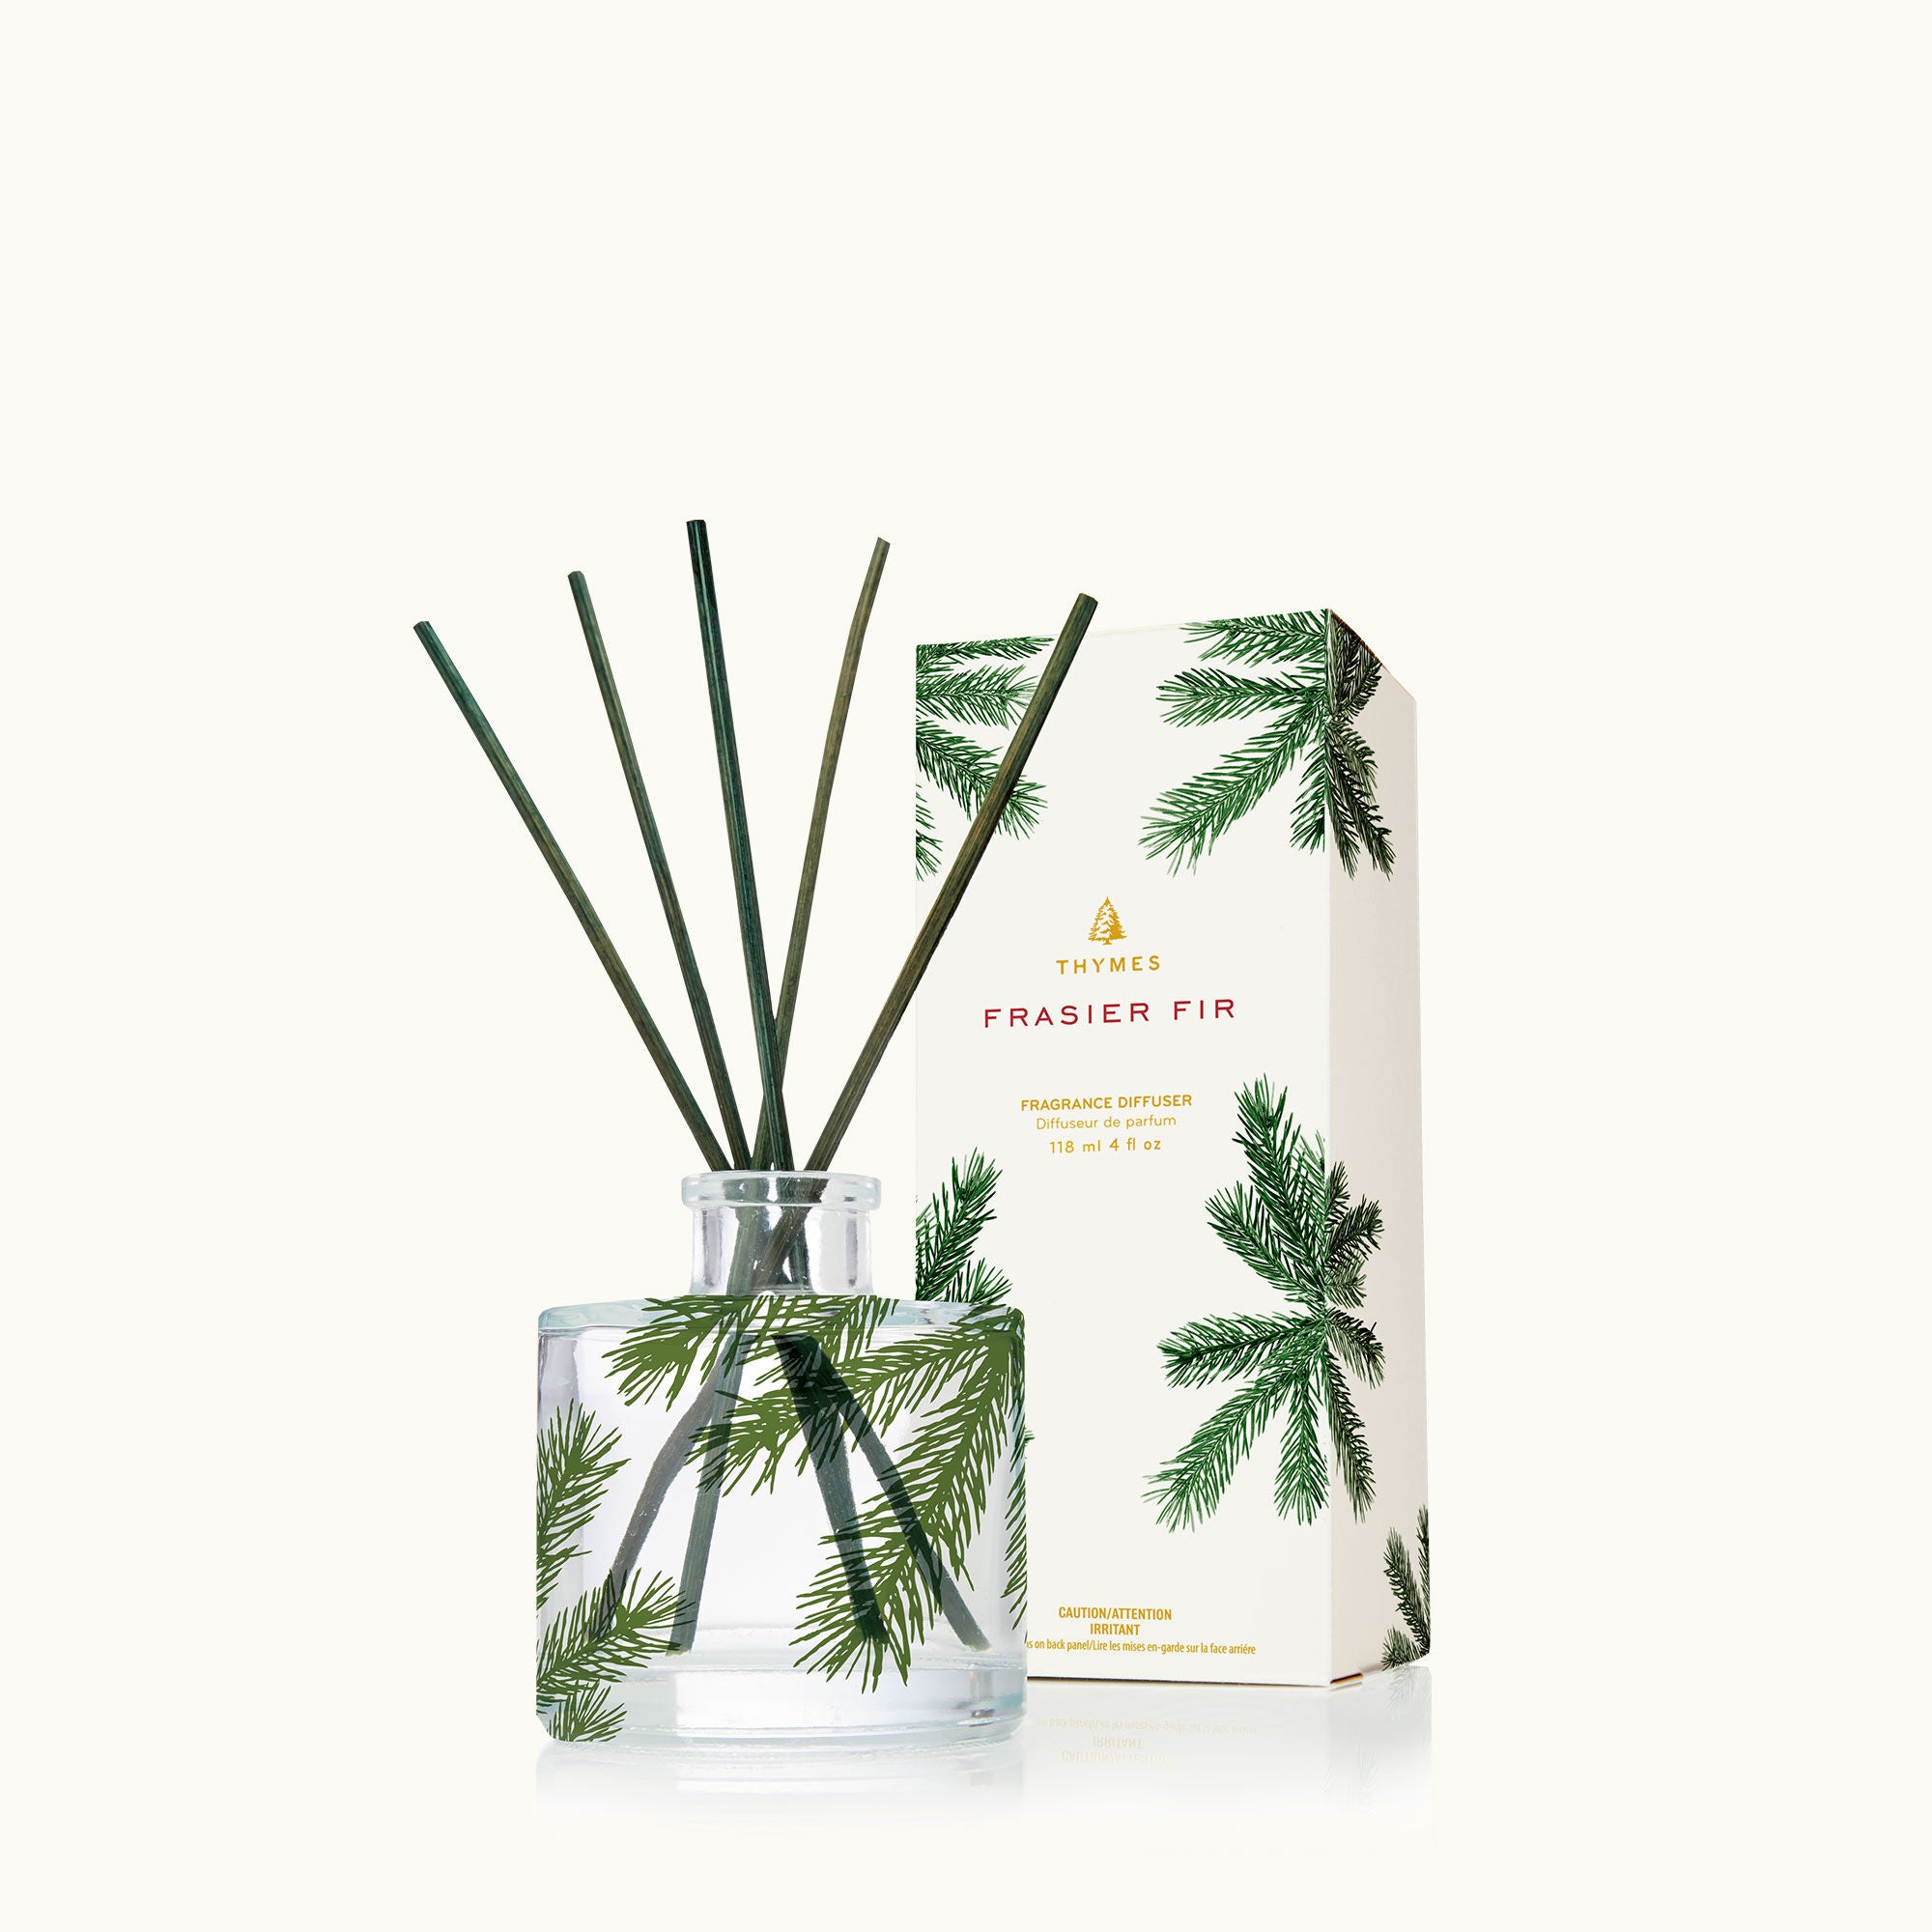 Thymes Frasier Fir Reed Diffuser - Petit Pine Needle